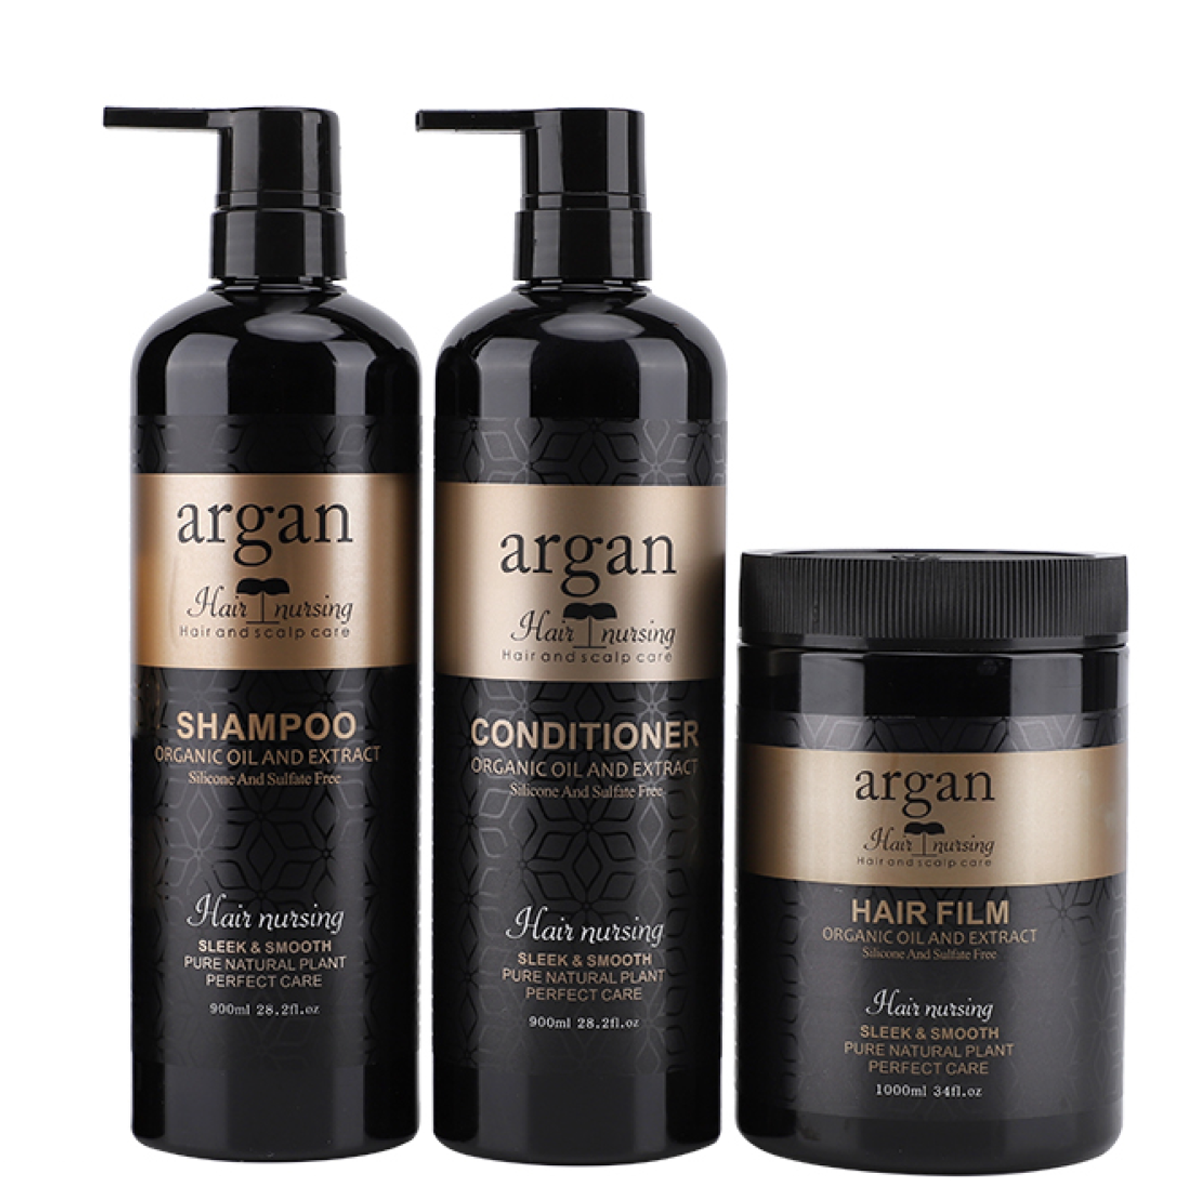 KERATIN QUEEN Argan Hair and Scalp Care Shampoo, Conditioner and Hair Film Combo Set